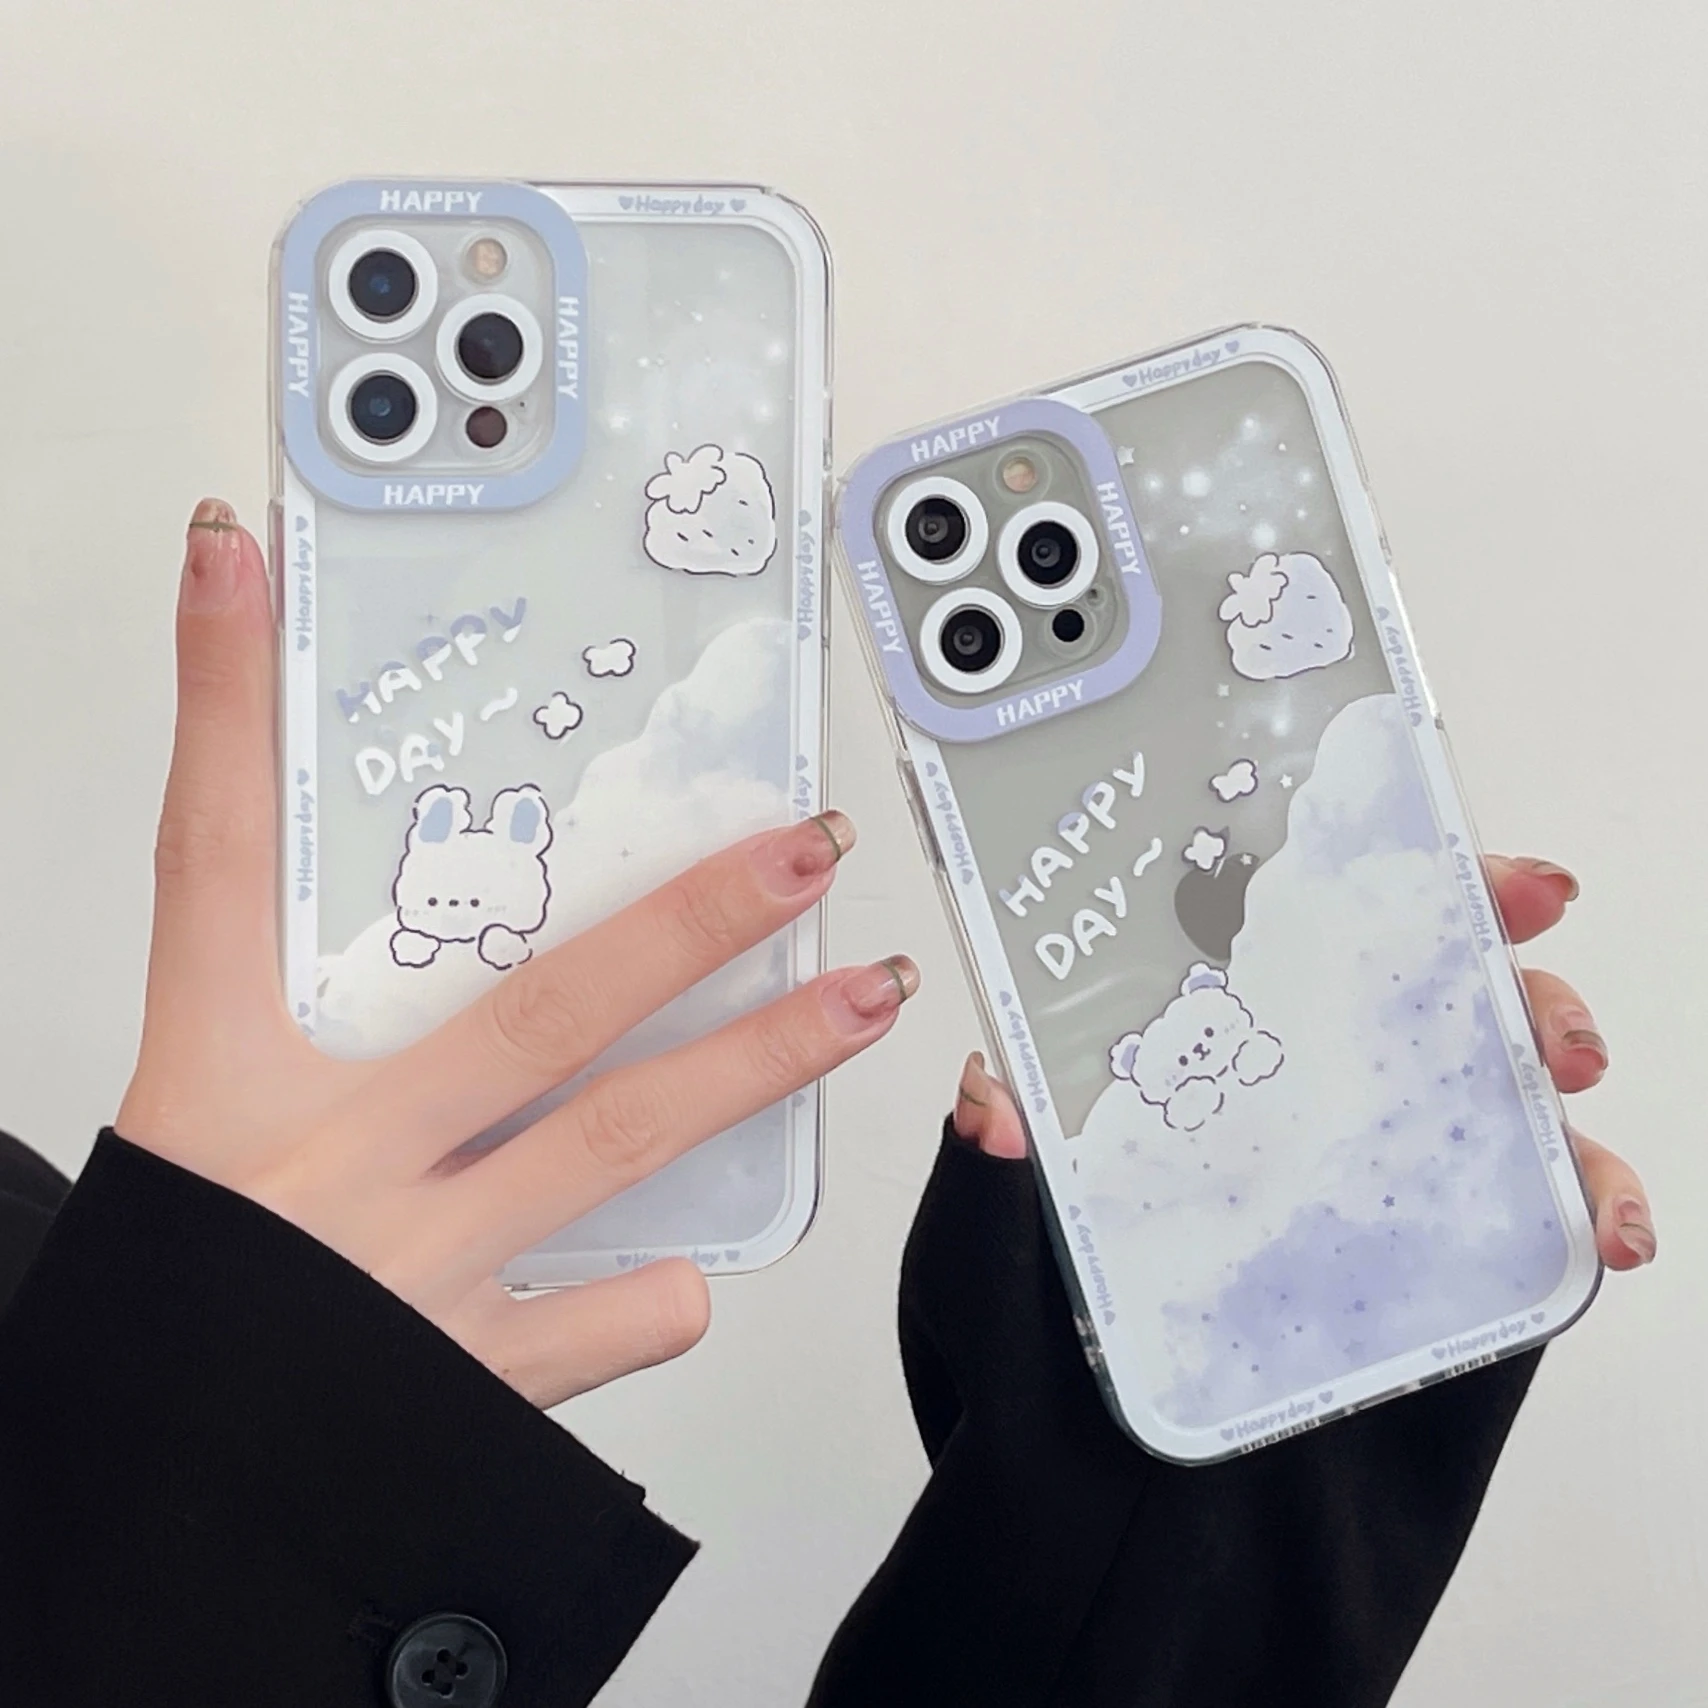 

Clouds Cute Phone Case for OPPO Realme 9 Pro Plus Realme 8 Pro 5 5i Realme C35 C31 C25S C21 C20 C15 C12 C11 C3 C2 C1 Soft Cover